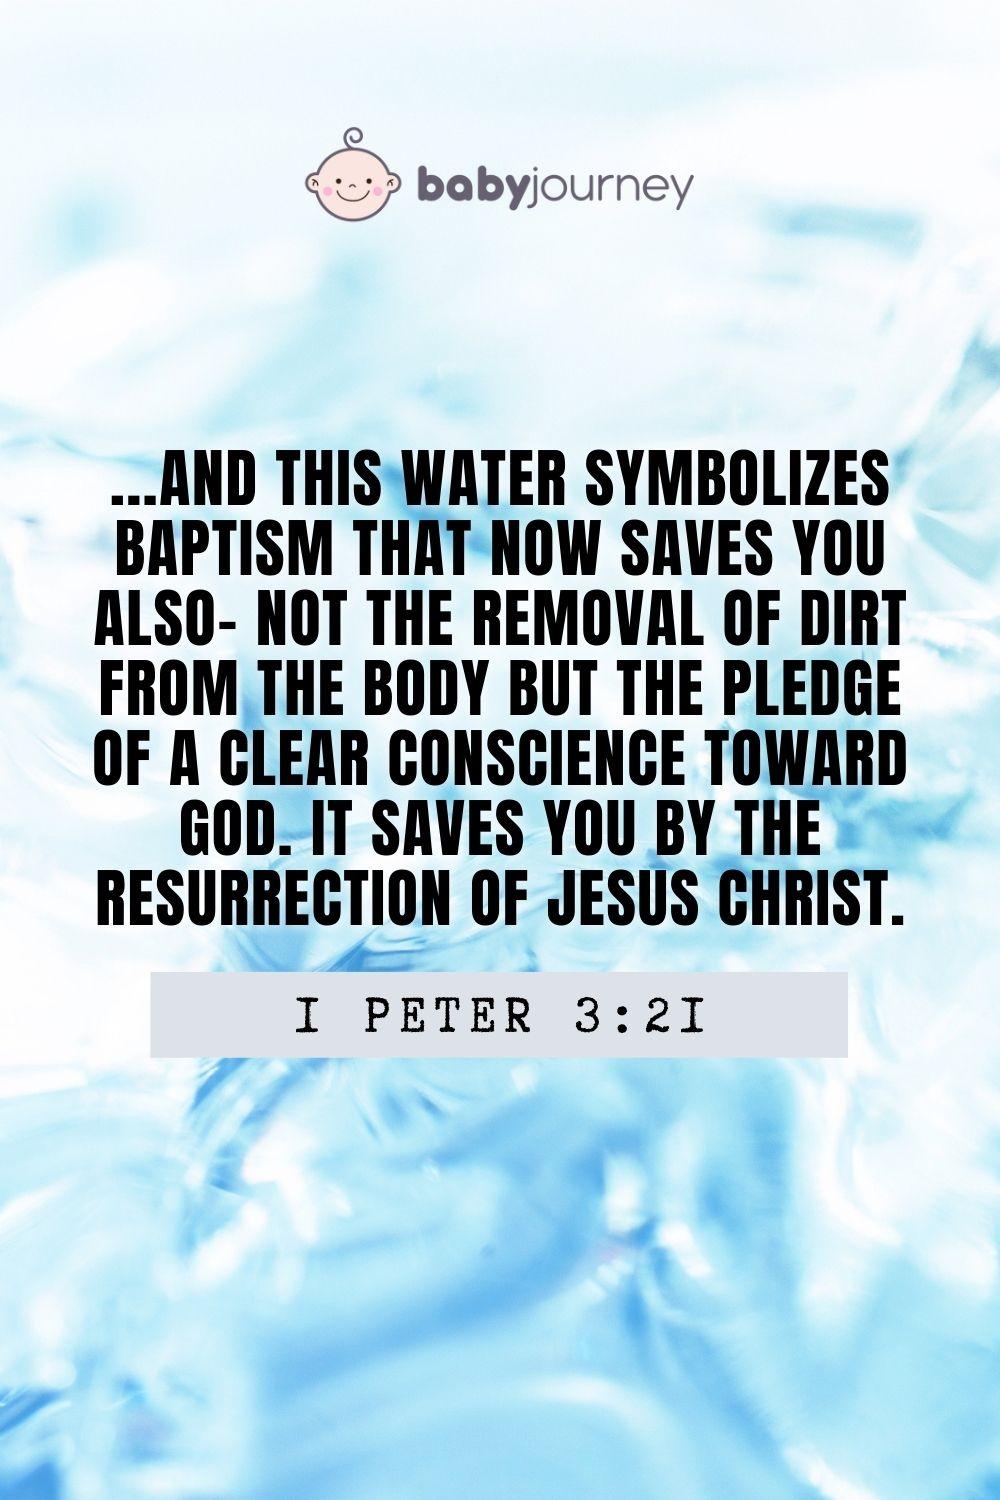 And this water symbolizes baptism that now saves you also- not the removal of dirt from the body but the pledge of a clear conscience toward God. It saves you by the resurrection of Jesus Christ. 1 Peter 3:21 - Inspirational baptism quotes - Baby Journey